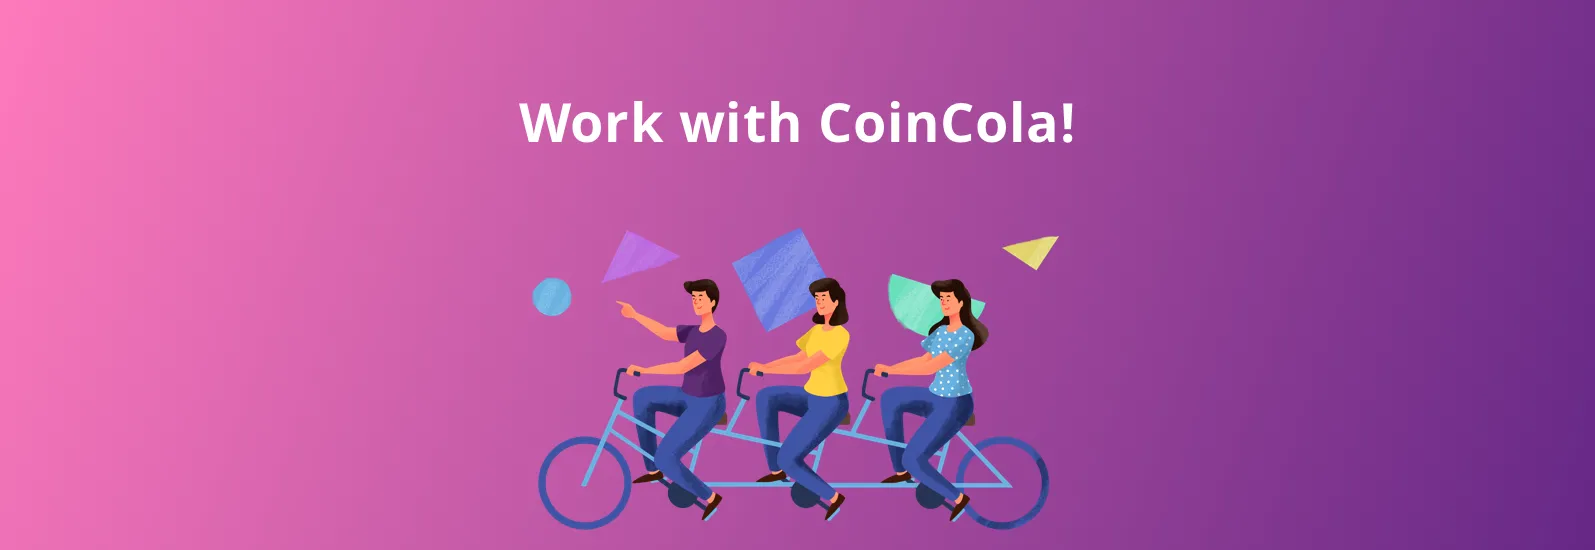 CoinCola is hiring in Nigeria!